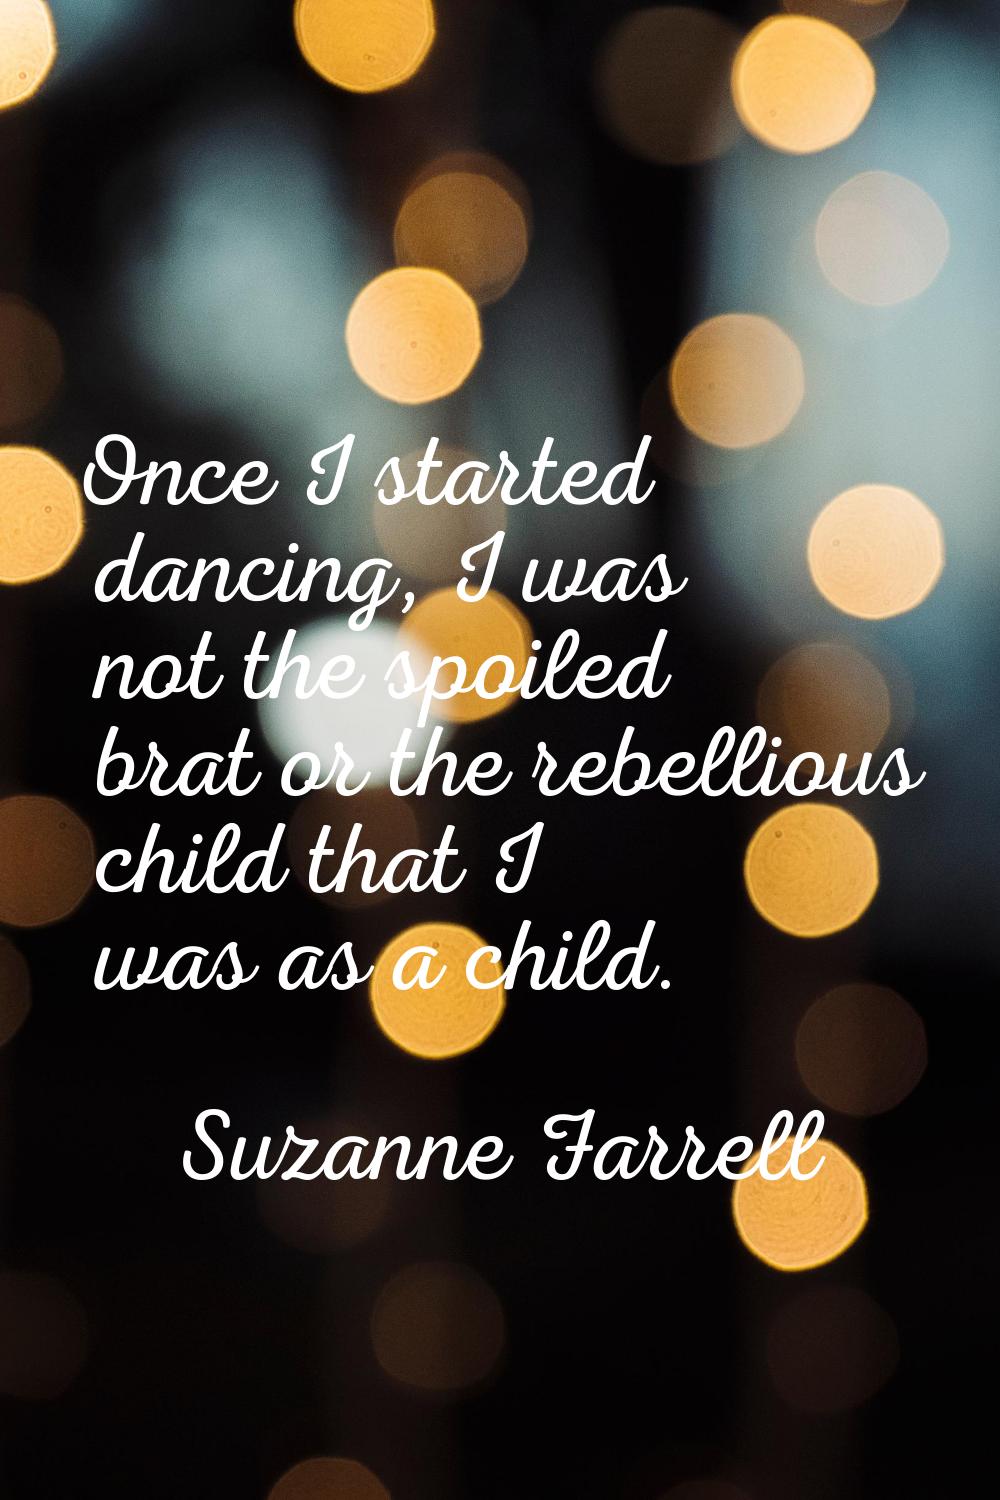 Once I started dancing, I was not the spoiled brat or the rebellious child that I was as a child.